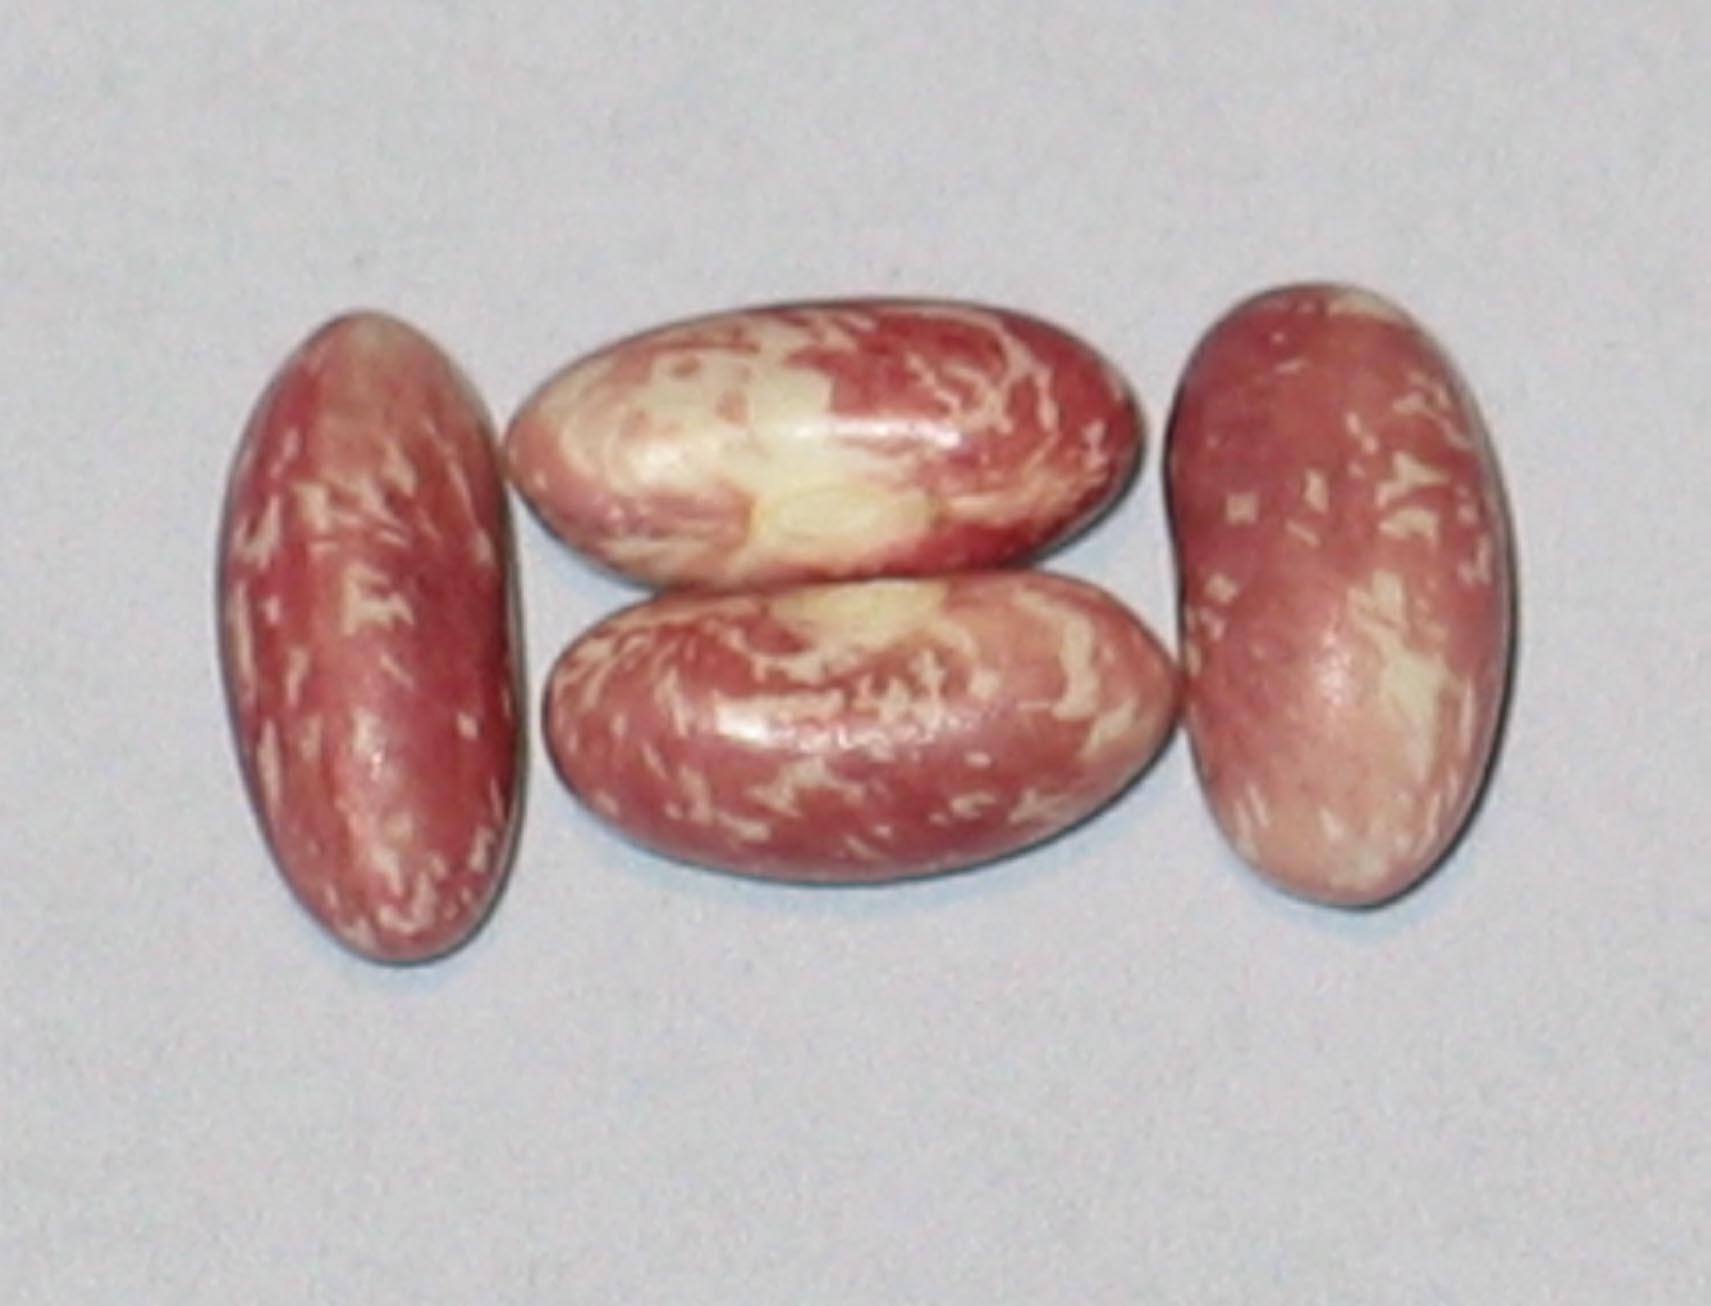 image of Conserva beans